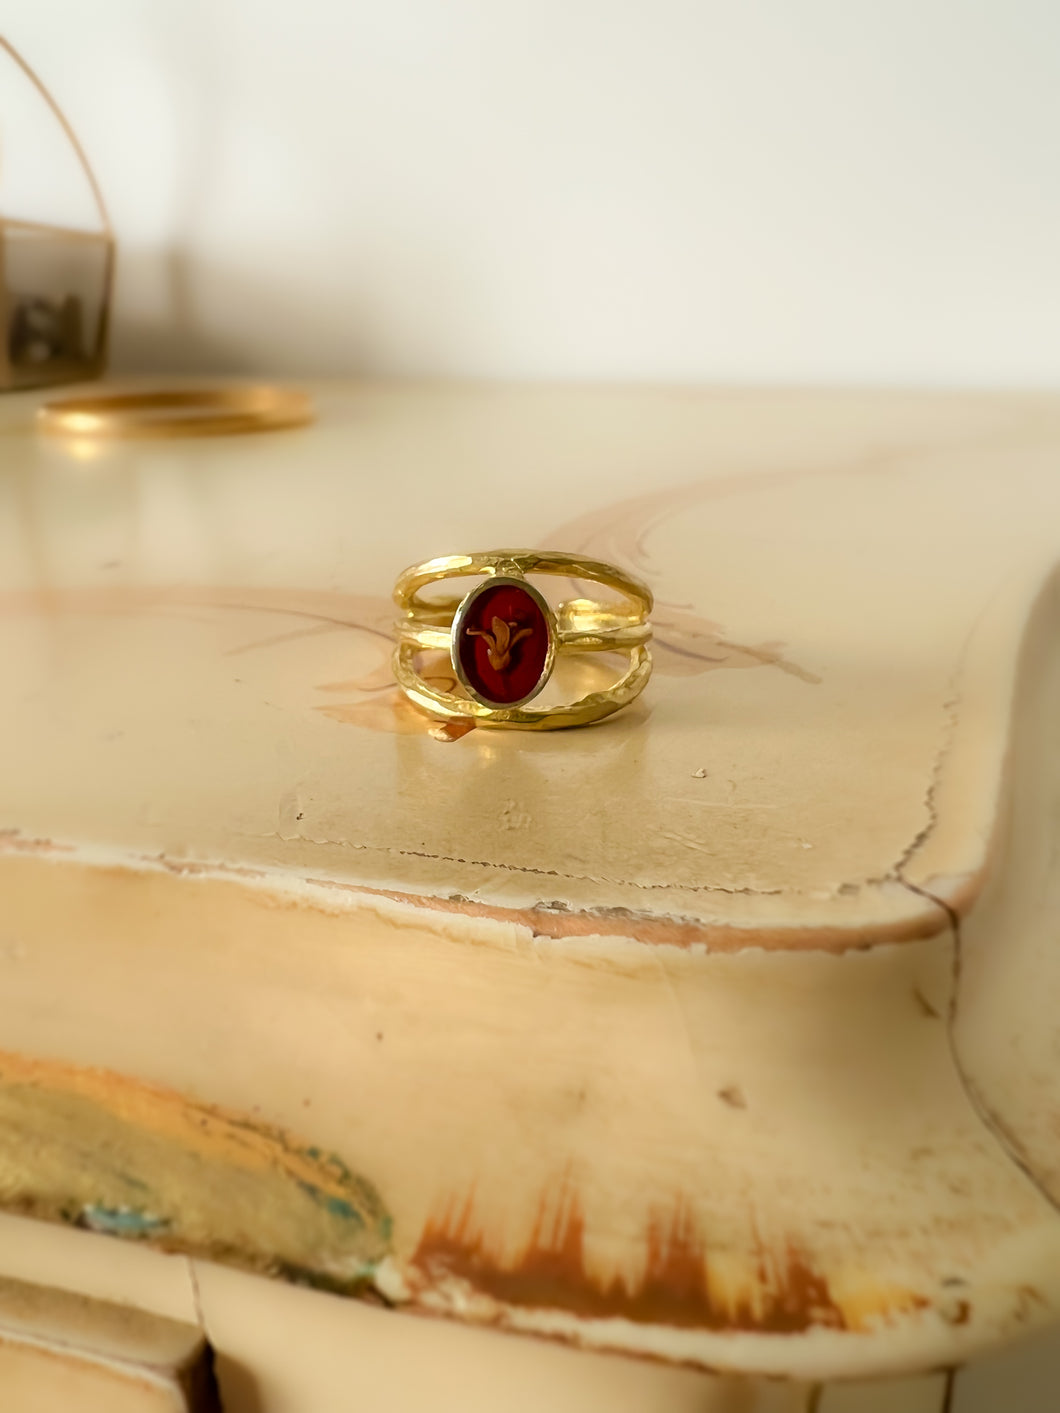 Adjustable ring with three bands and privet flower on a red background